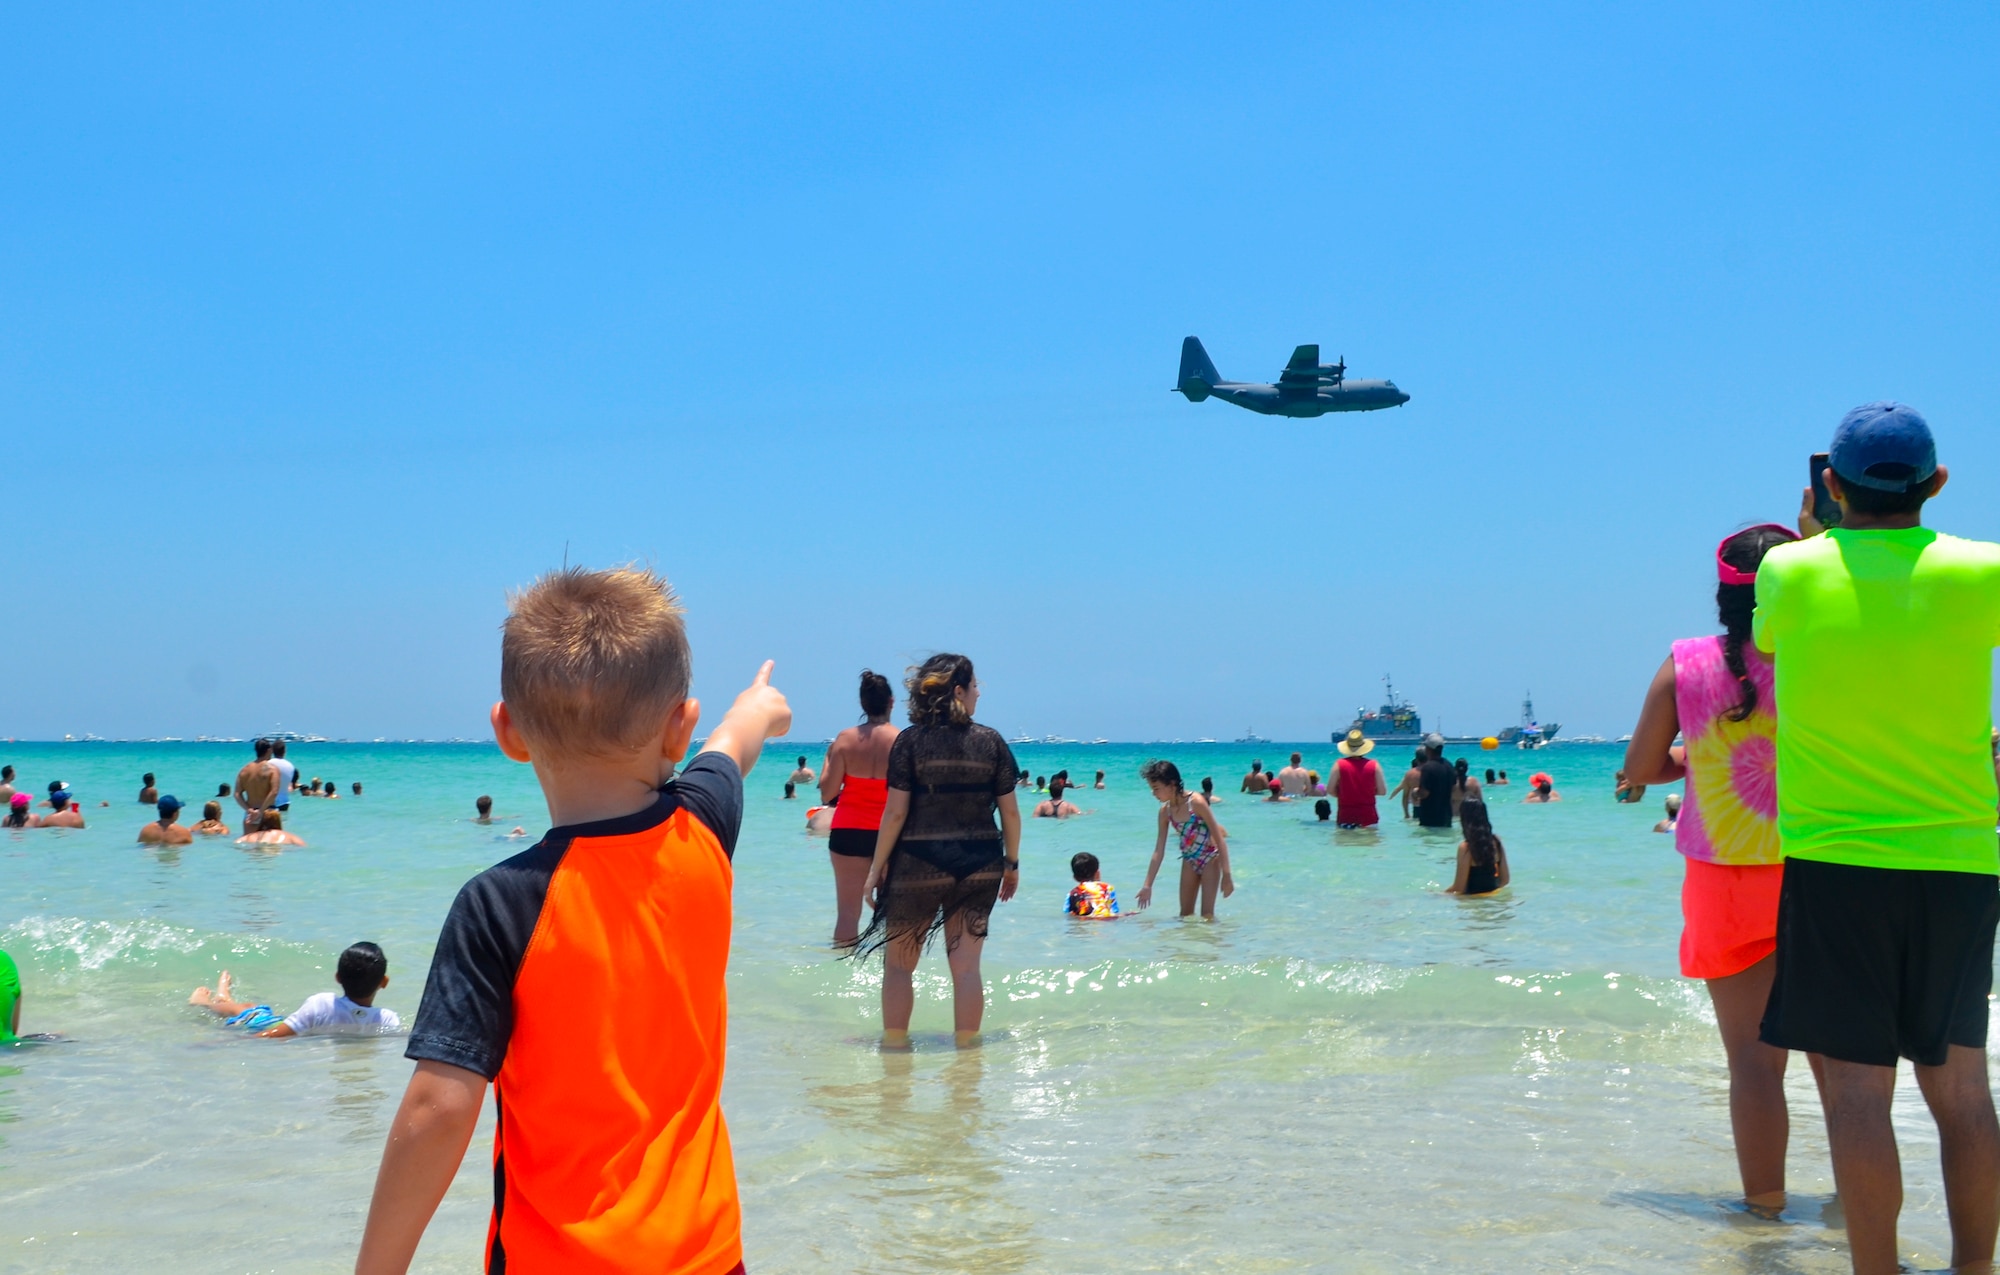 Spectators view an aerial demonstration during the National Salute to America’s Heroes Air and Sea Show, May 28, 2017, at Miami Beach, Fla. Top tier U.S. military assets assembled in Miami to showcase air superiority while honoring those who have made the ultimate sacrifice during the Memorial Day weekend. (U.S. Air Force photo/Senior Airman Brandon Kalloo Sanes)